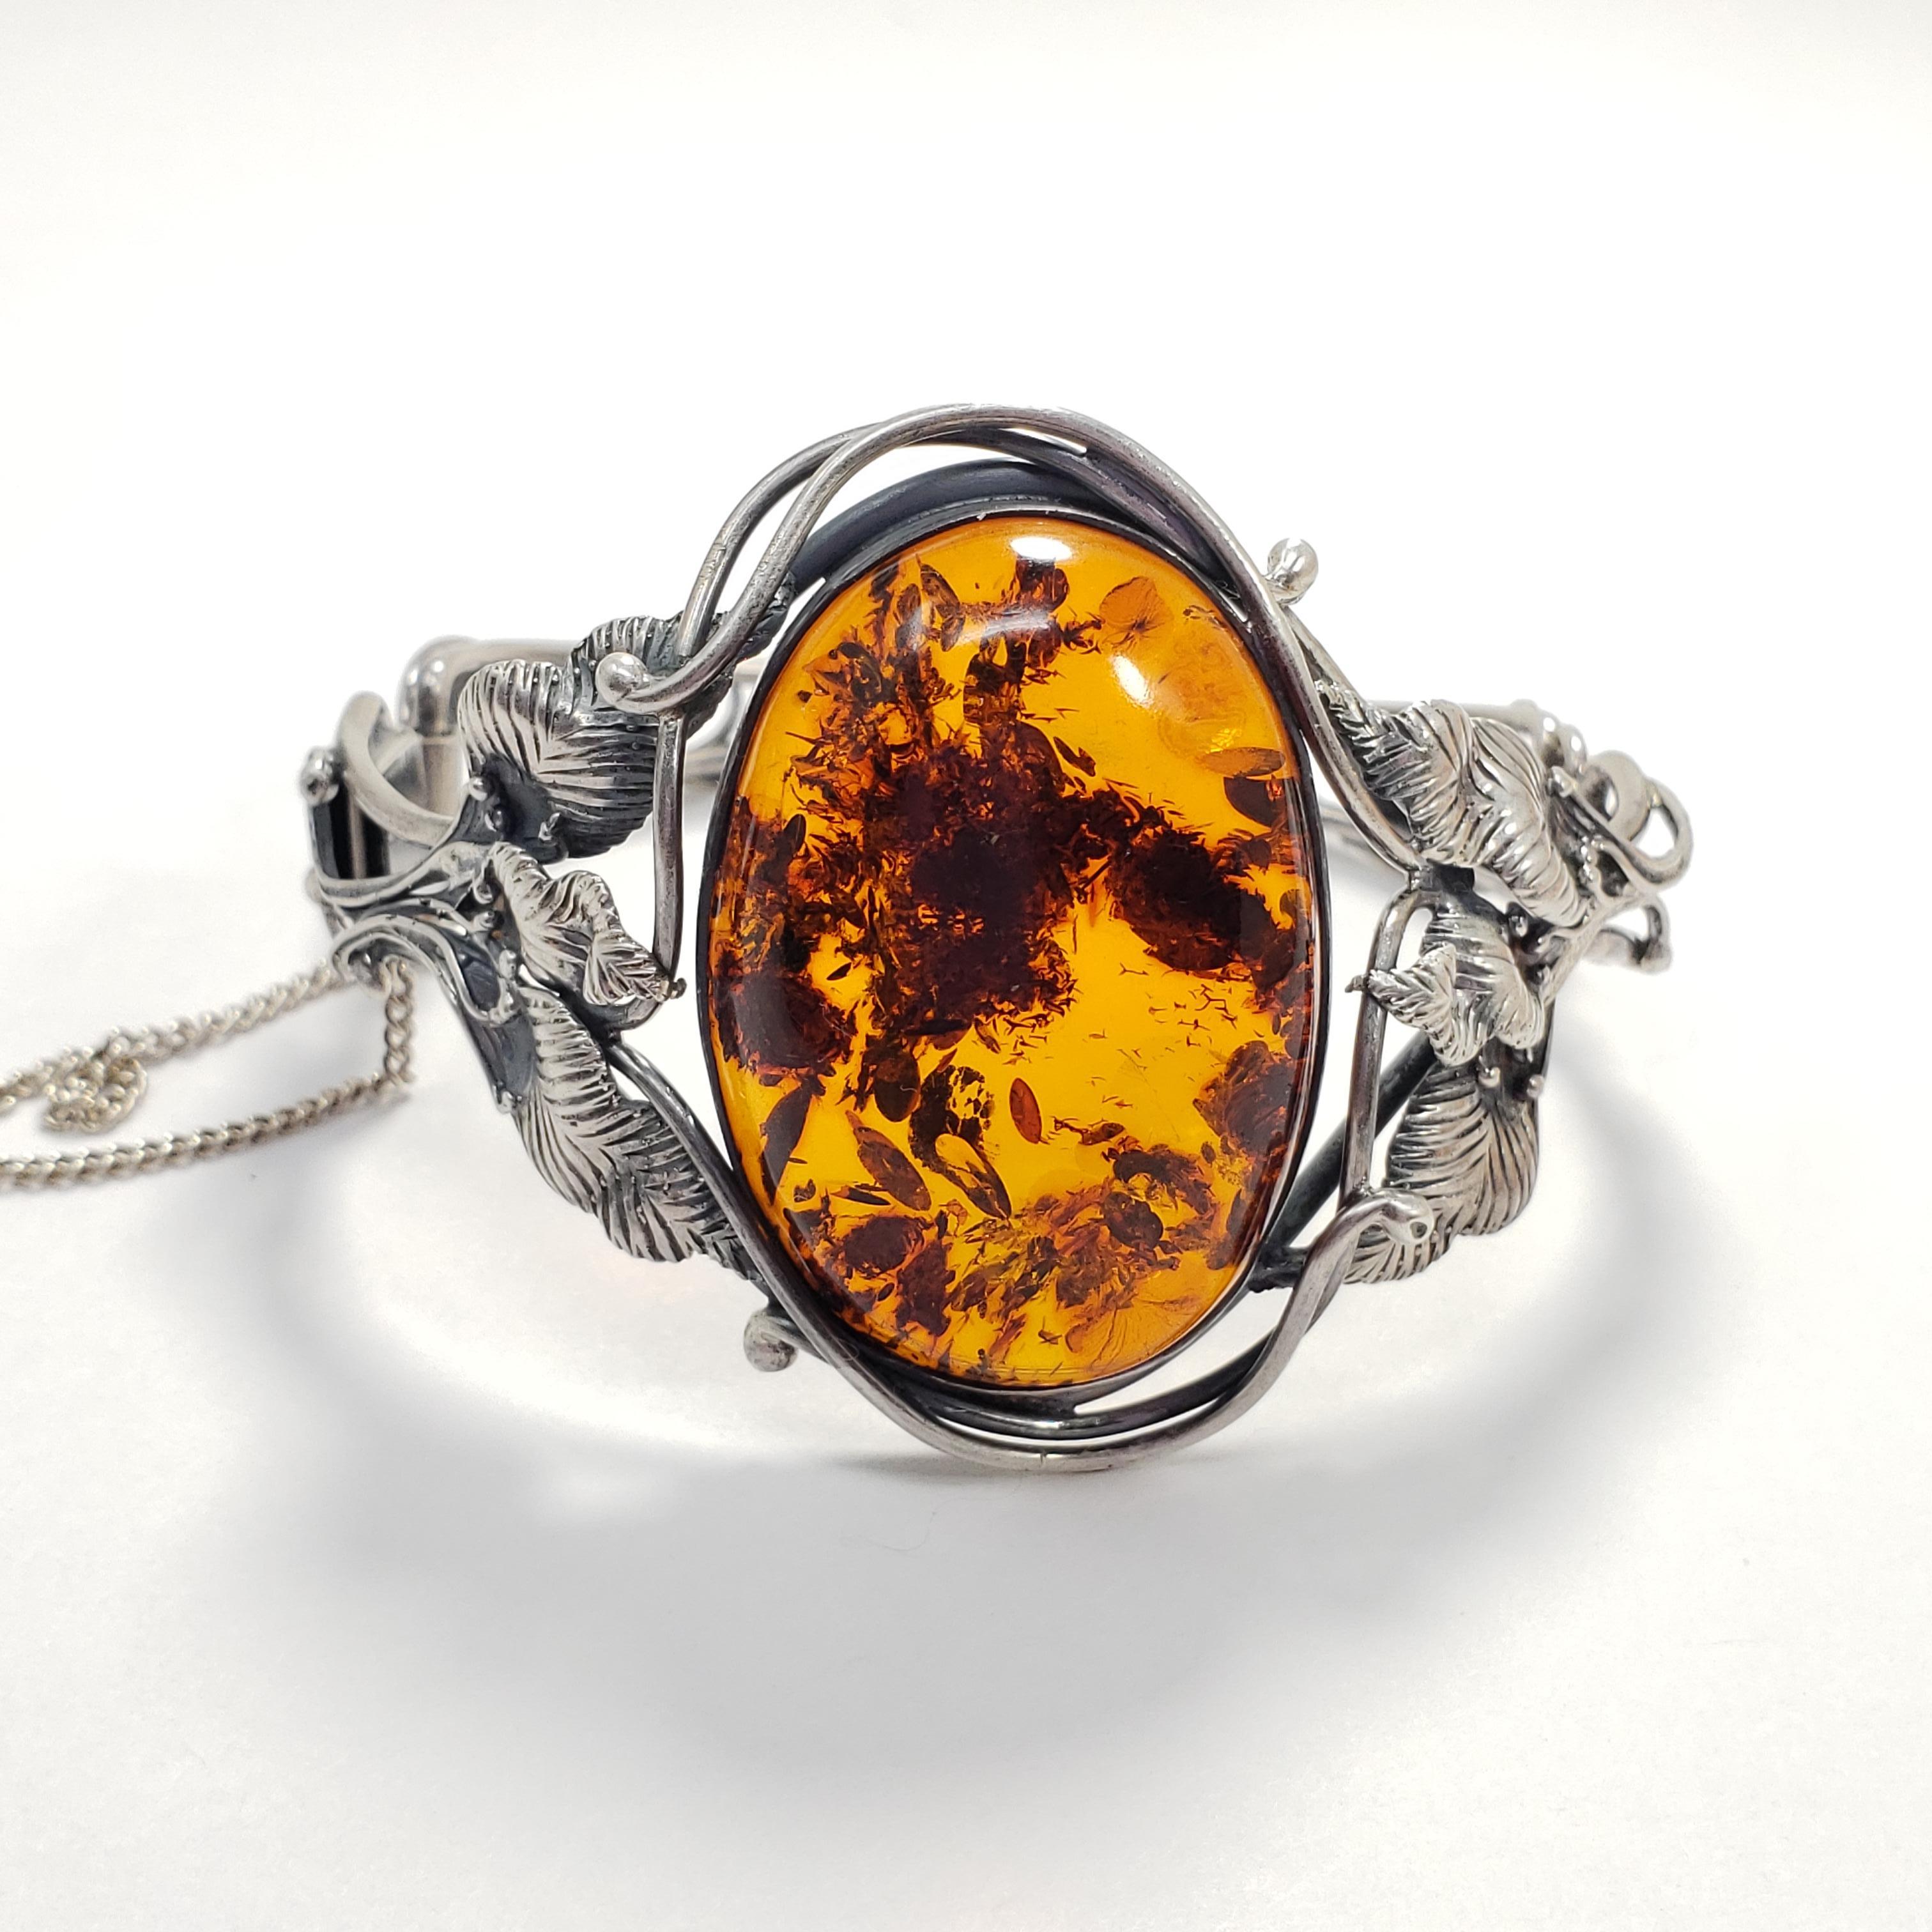 Exquisite Russian bracelet, featuring a genuine Baltic amber cabochon on a stylish sterling silver cuff.

Inner diameter at widest part: 2.25 inches
Inner circumference: 6.5 inches